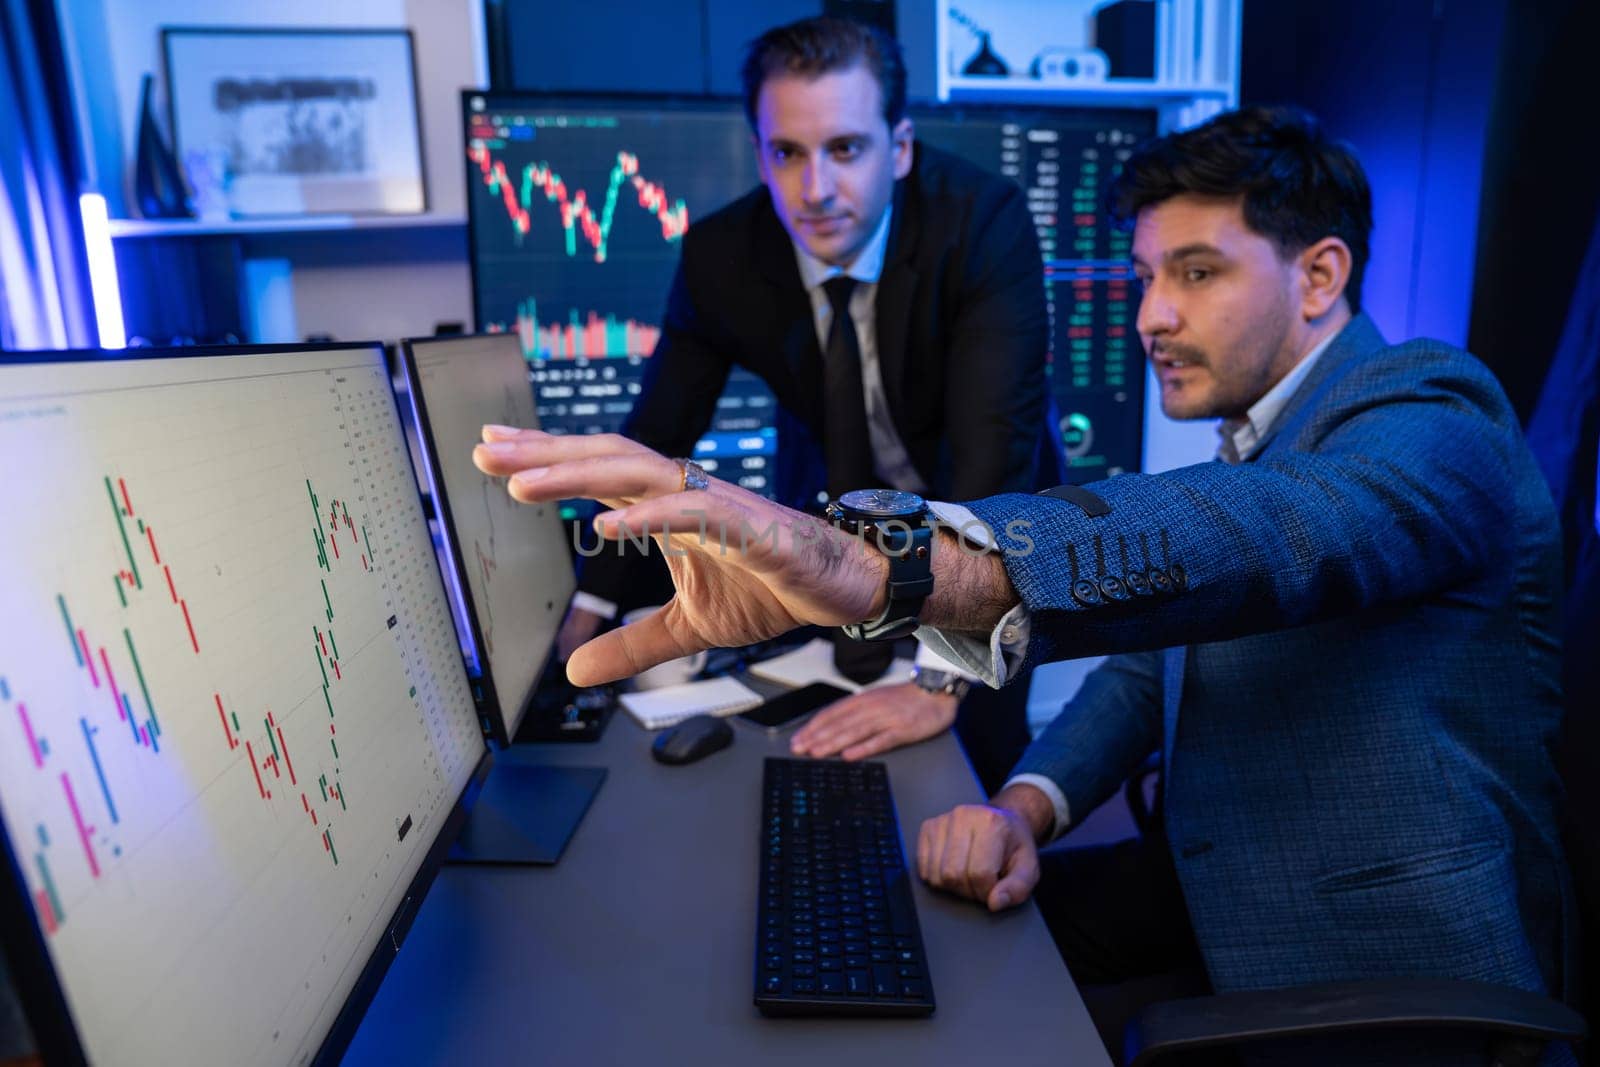 Stock exchange traders looking on high profit chart investment in panorama view, analyzing on monitor at night. Concept of discussing financial technology growth in neon light at workplace. Sellable.